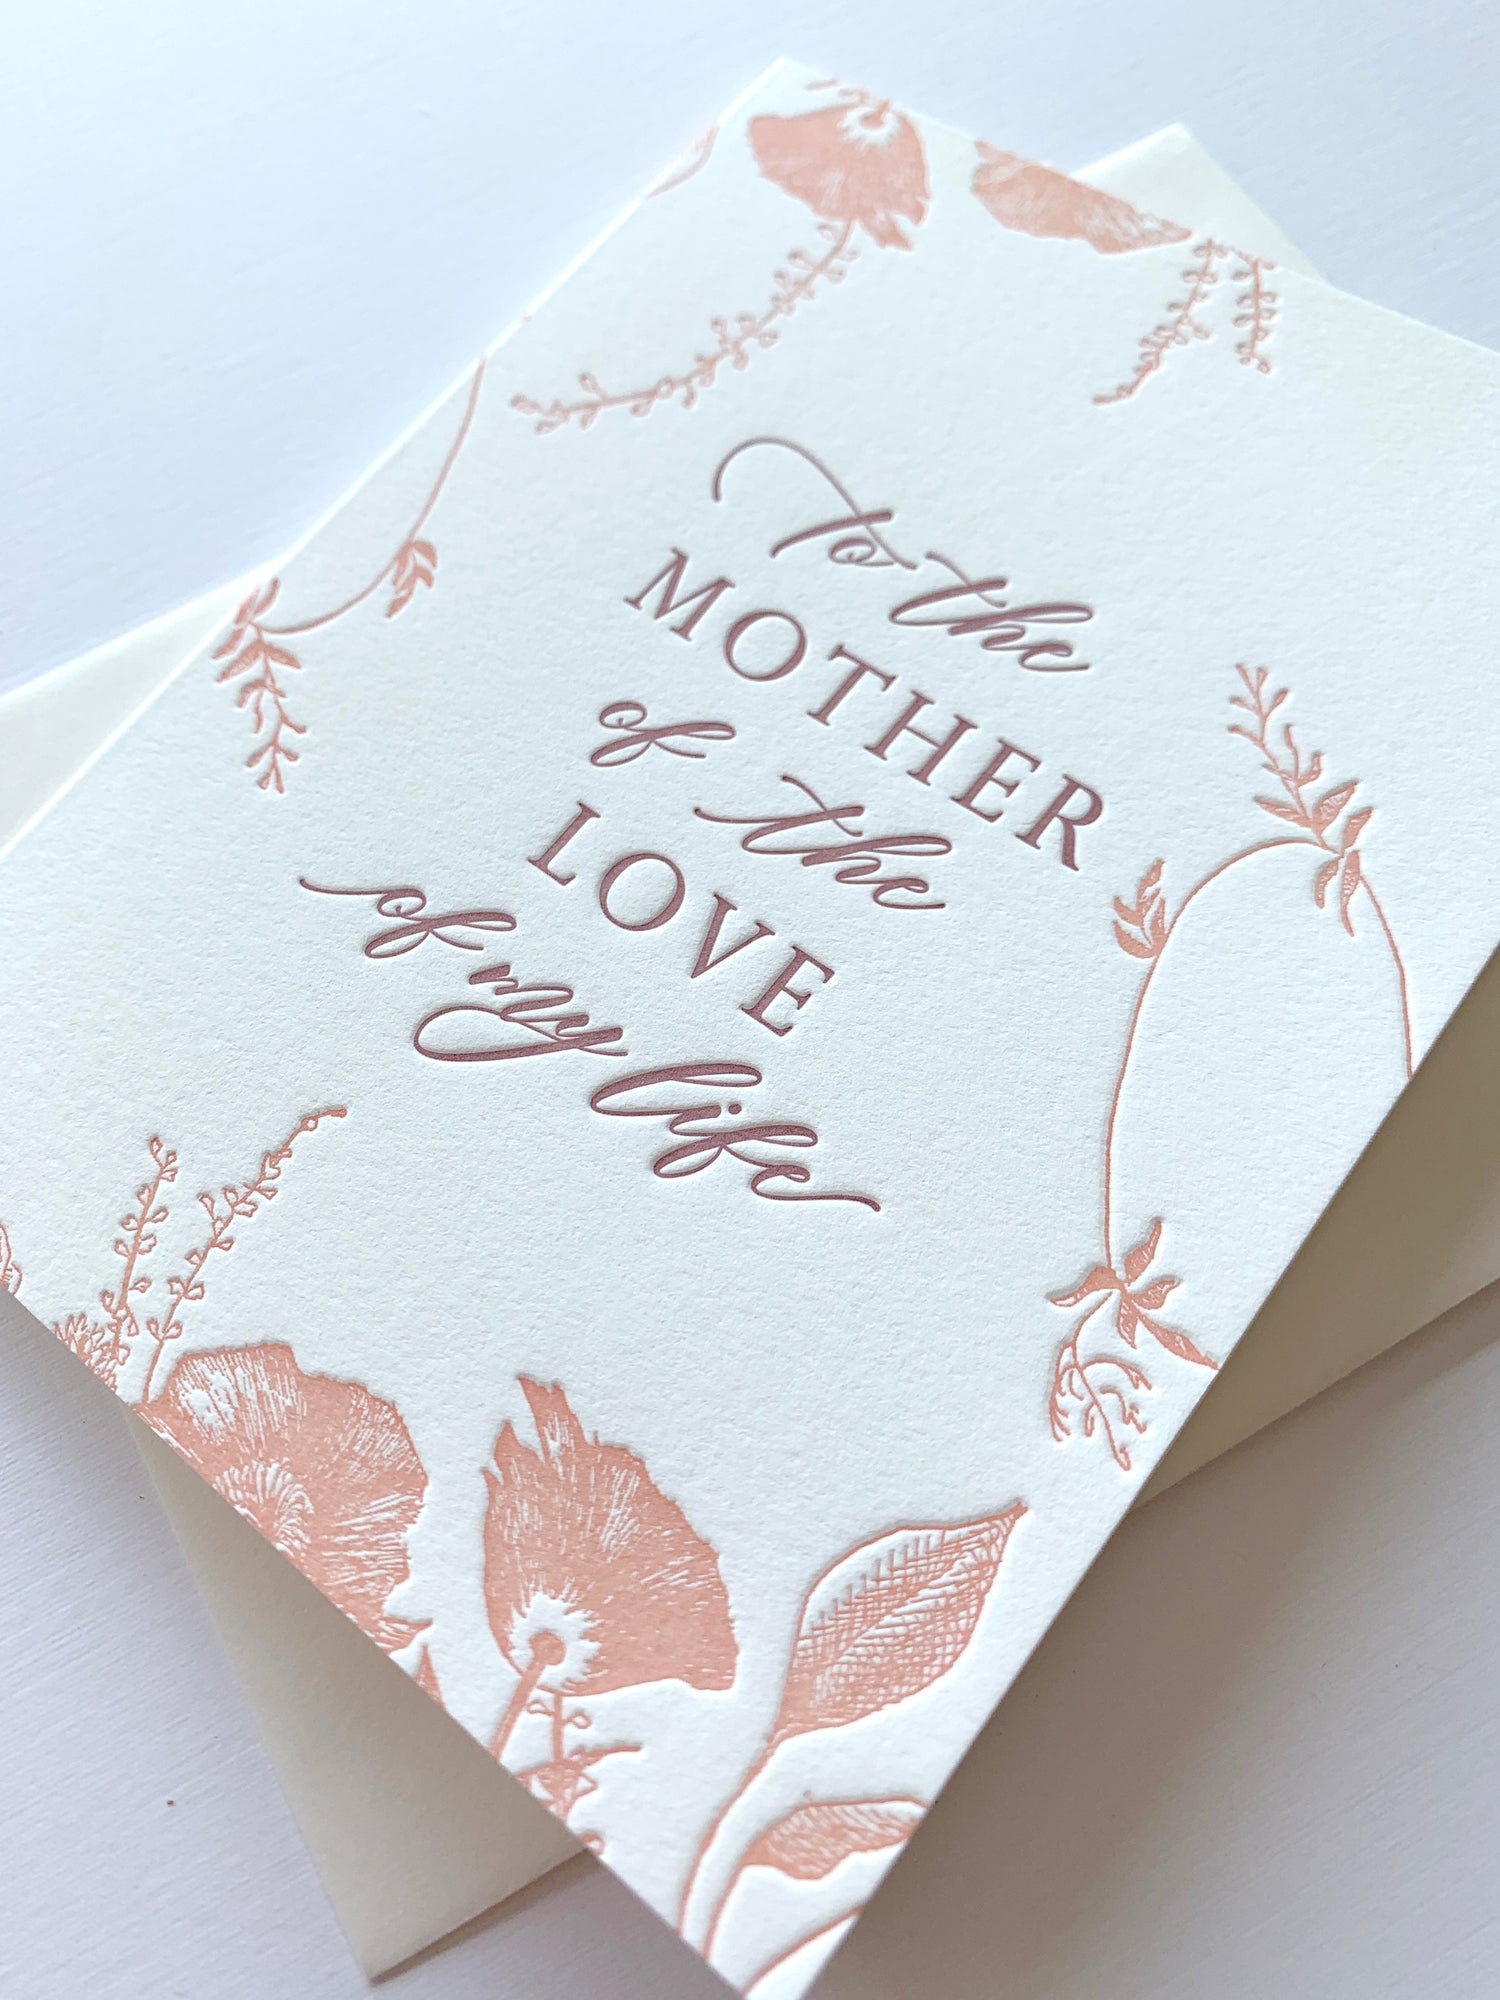 Letterpress wedding card with florals that says "to the mother of the love of my life" by Rust Belt Love